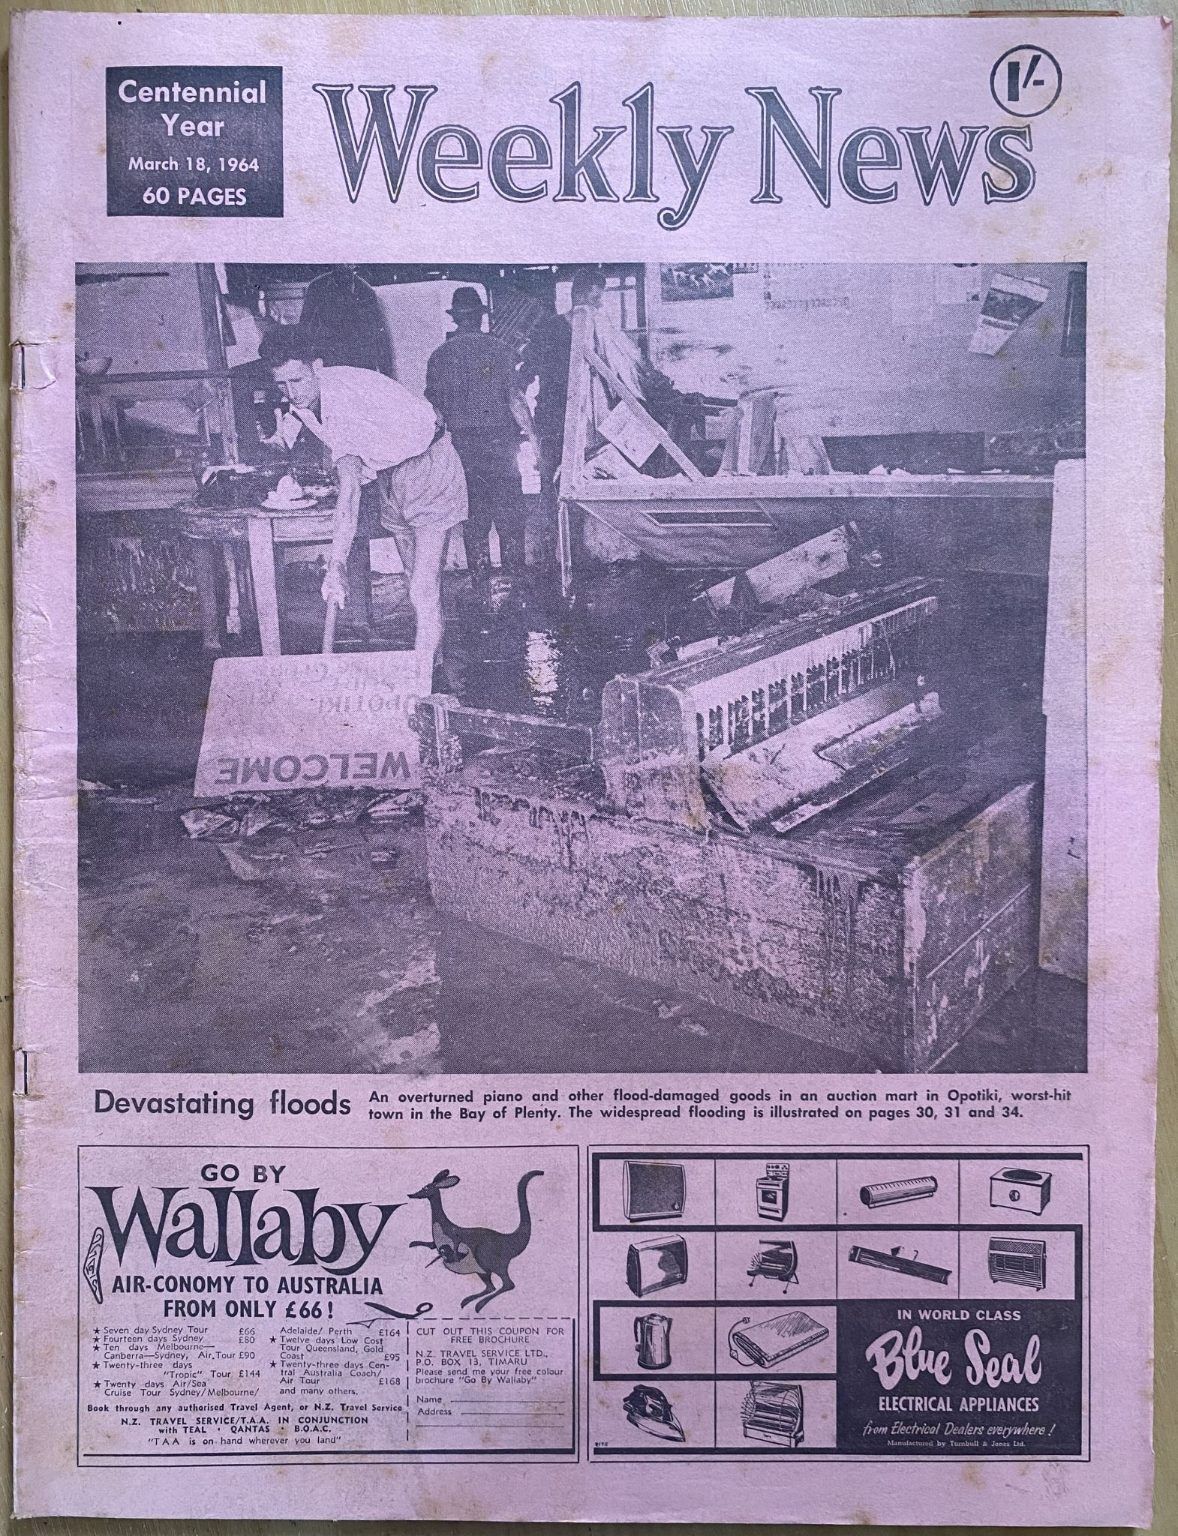 OLD NEWSPAPER: Weekly News, No. 5234, 18 March 1964